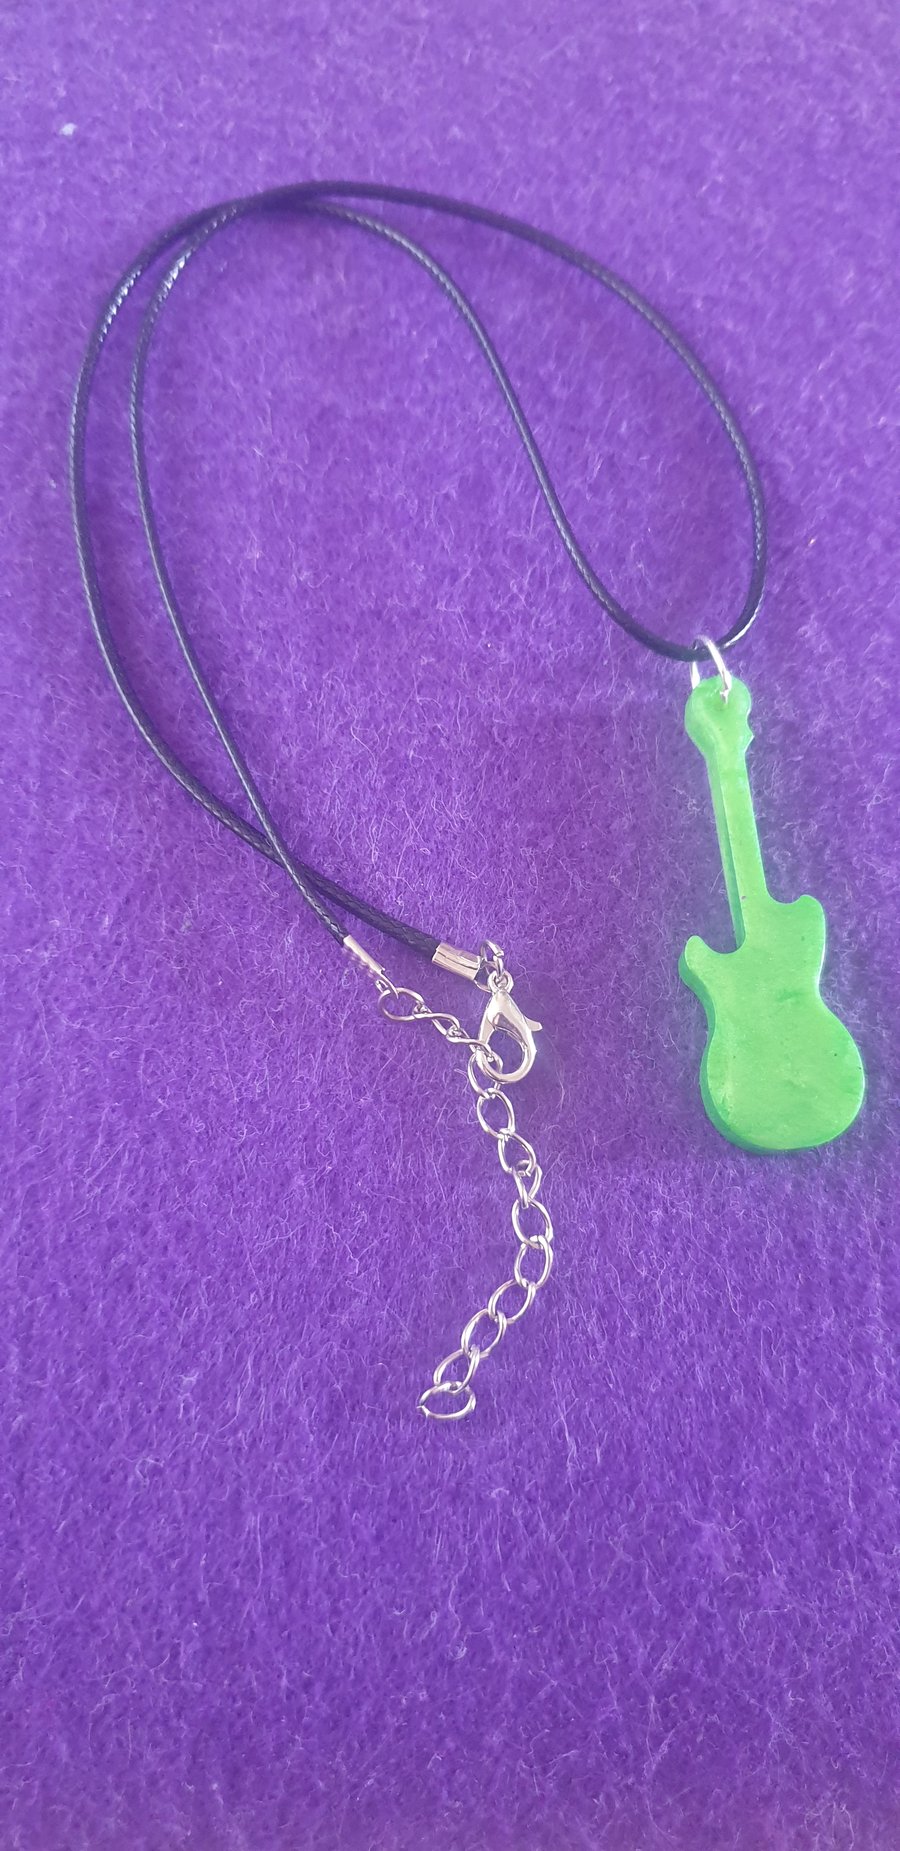 Green guitar pendant on black cord necklace